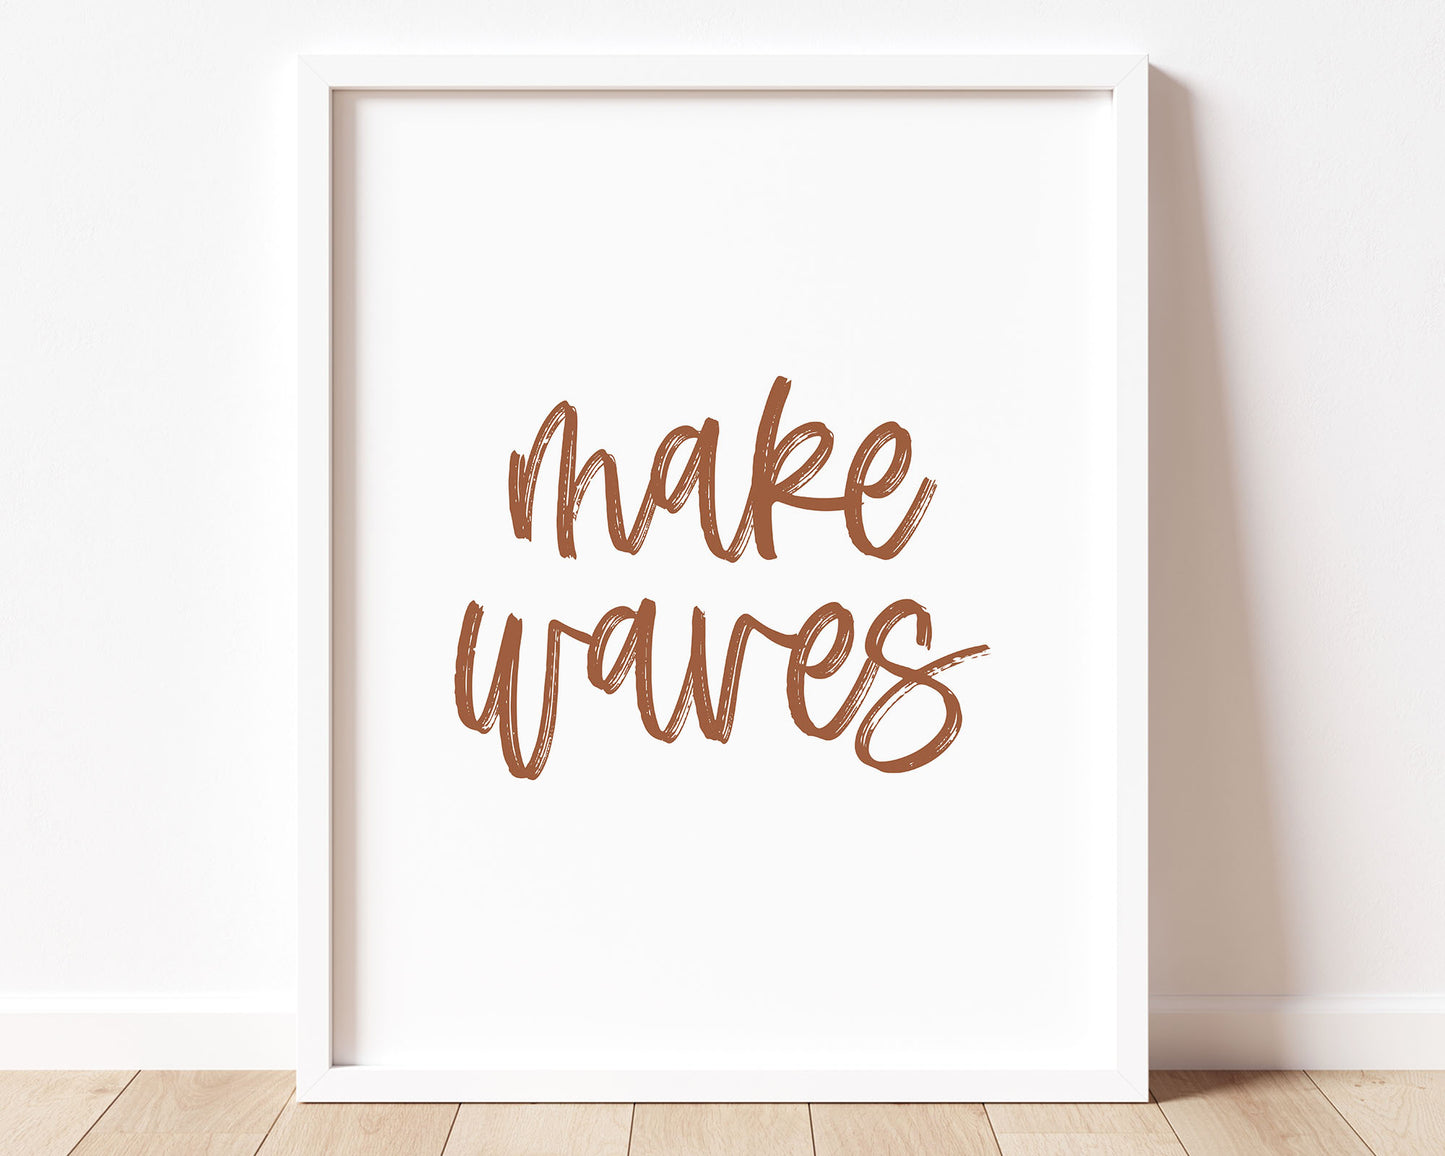 Earth toned rusty, clay terracotta Make Waves Printable Wall Art featuring a textured brush style cursive lettered quote.